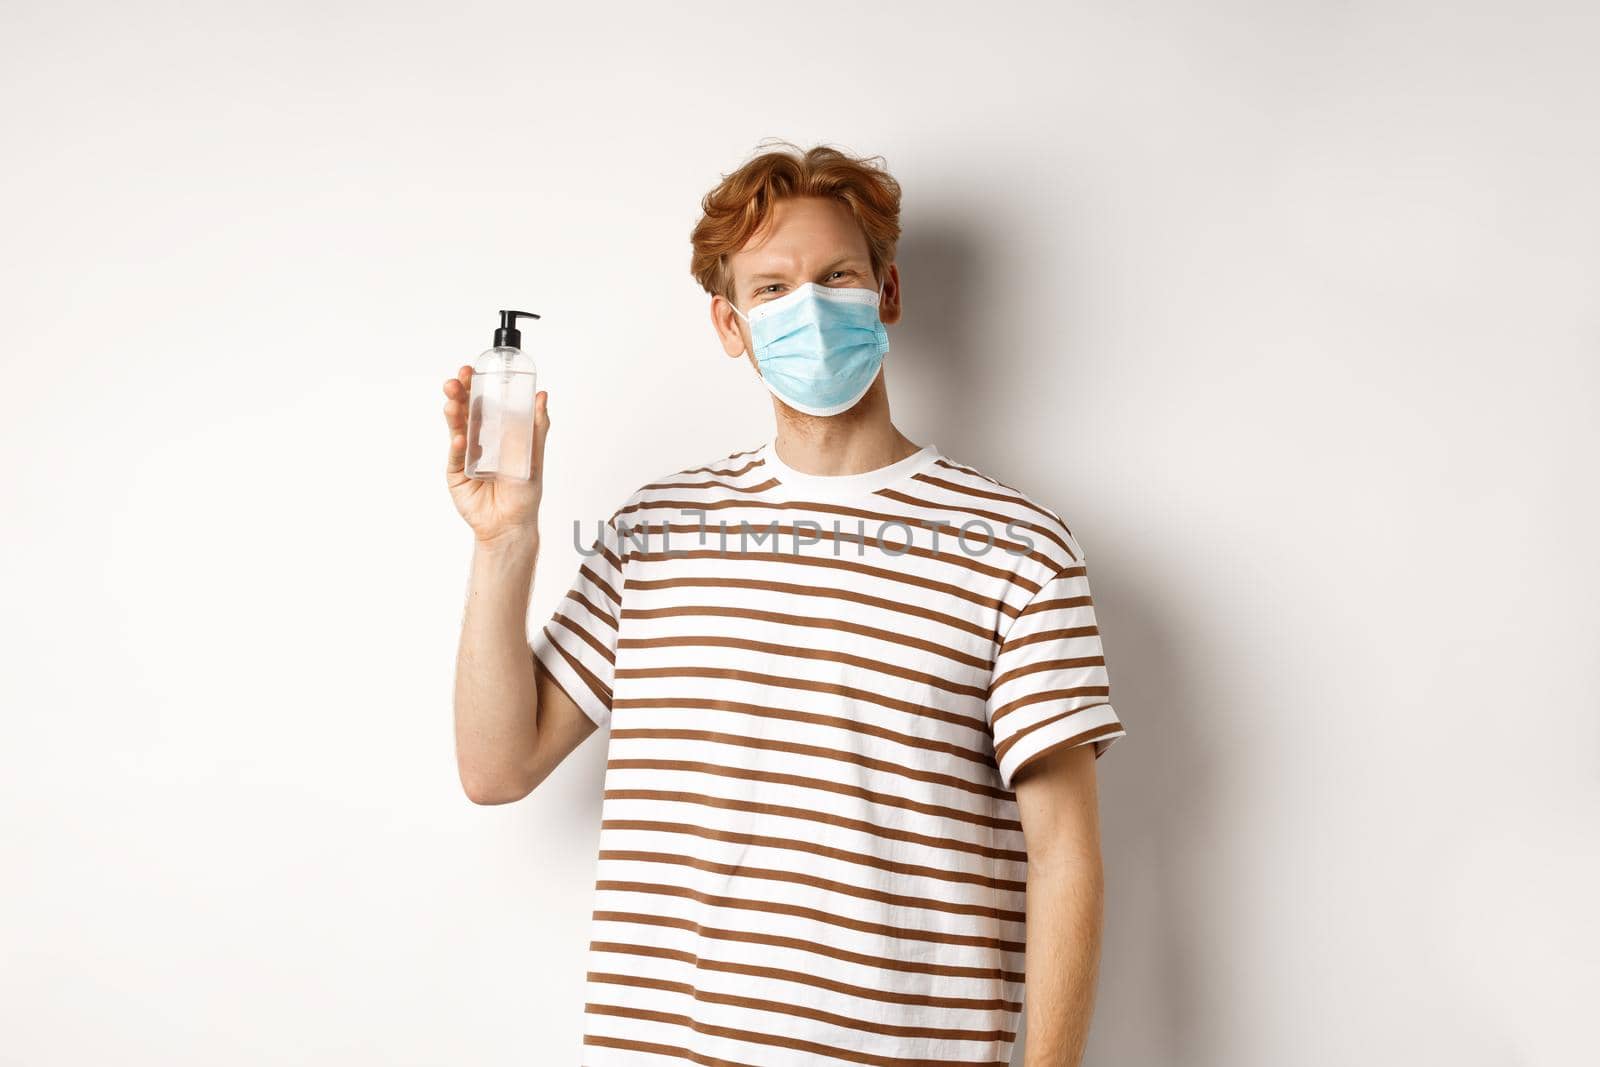 Covid-19, health and lifestyle concept. Smiling male model with red hair, wearing face mask, showing hand sanitizer, recommend to use antiseptic, white background.